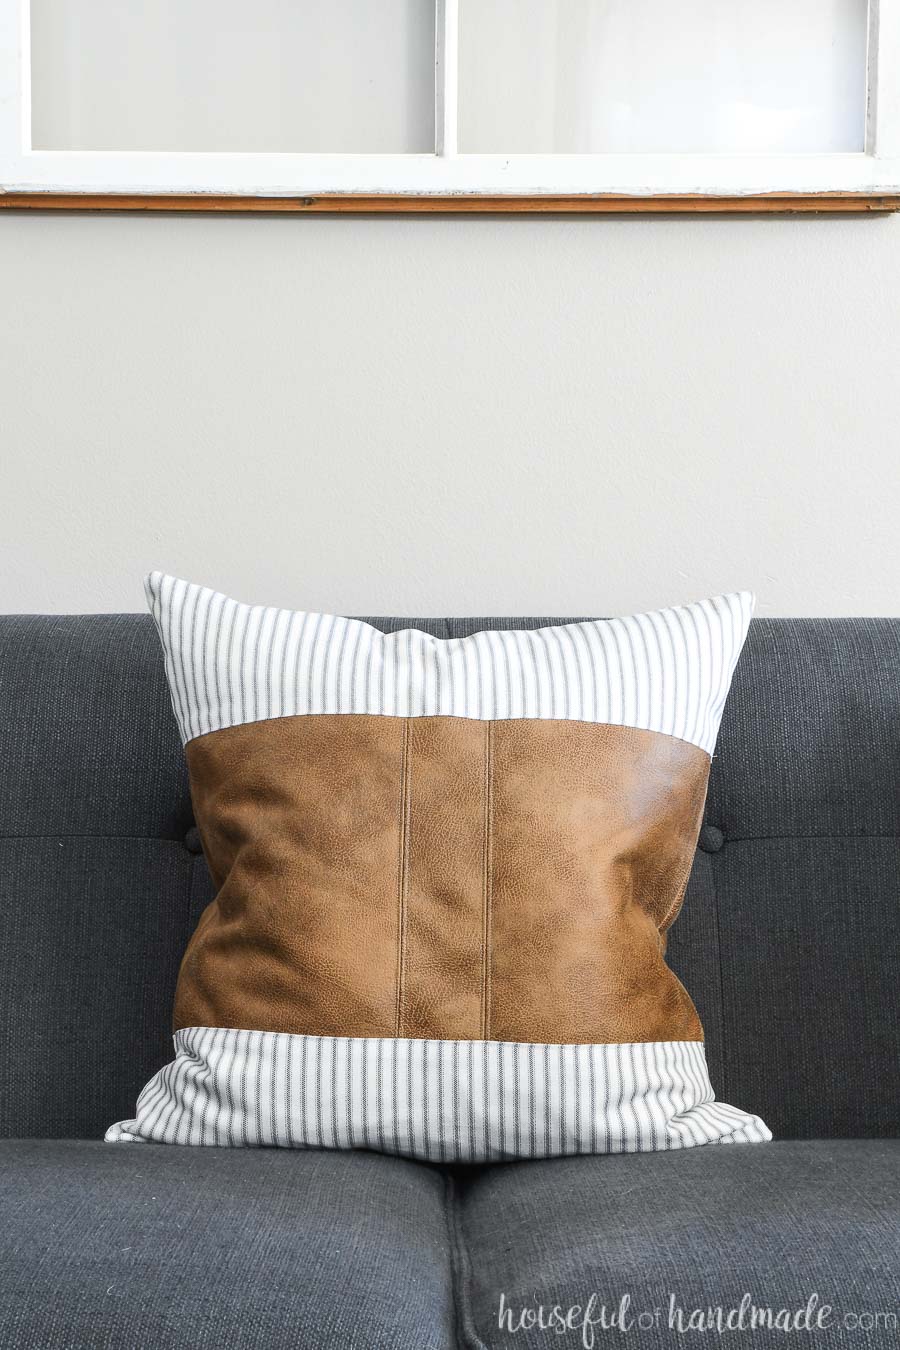 Leather pillow cover with center stripe and ticking fabric on a navy sofa.